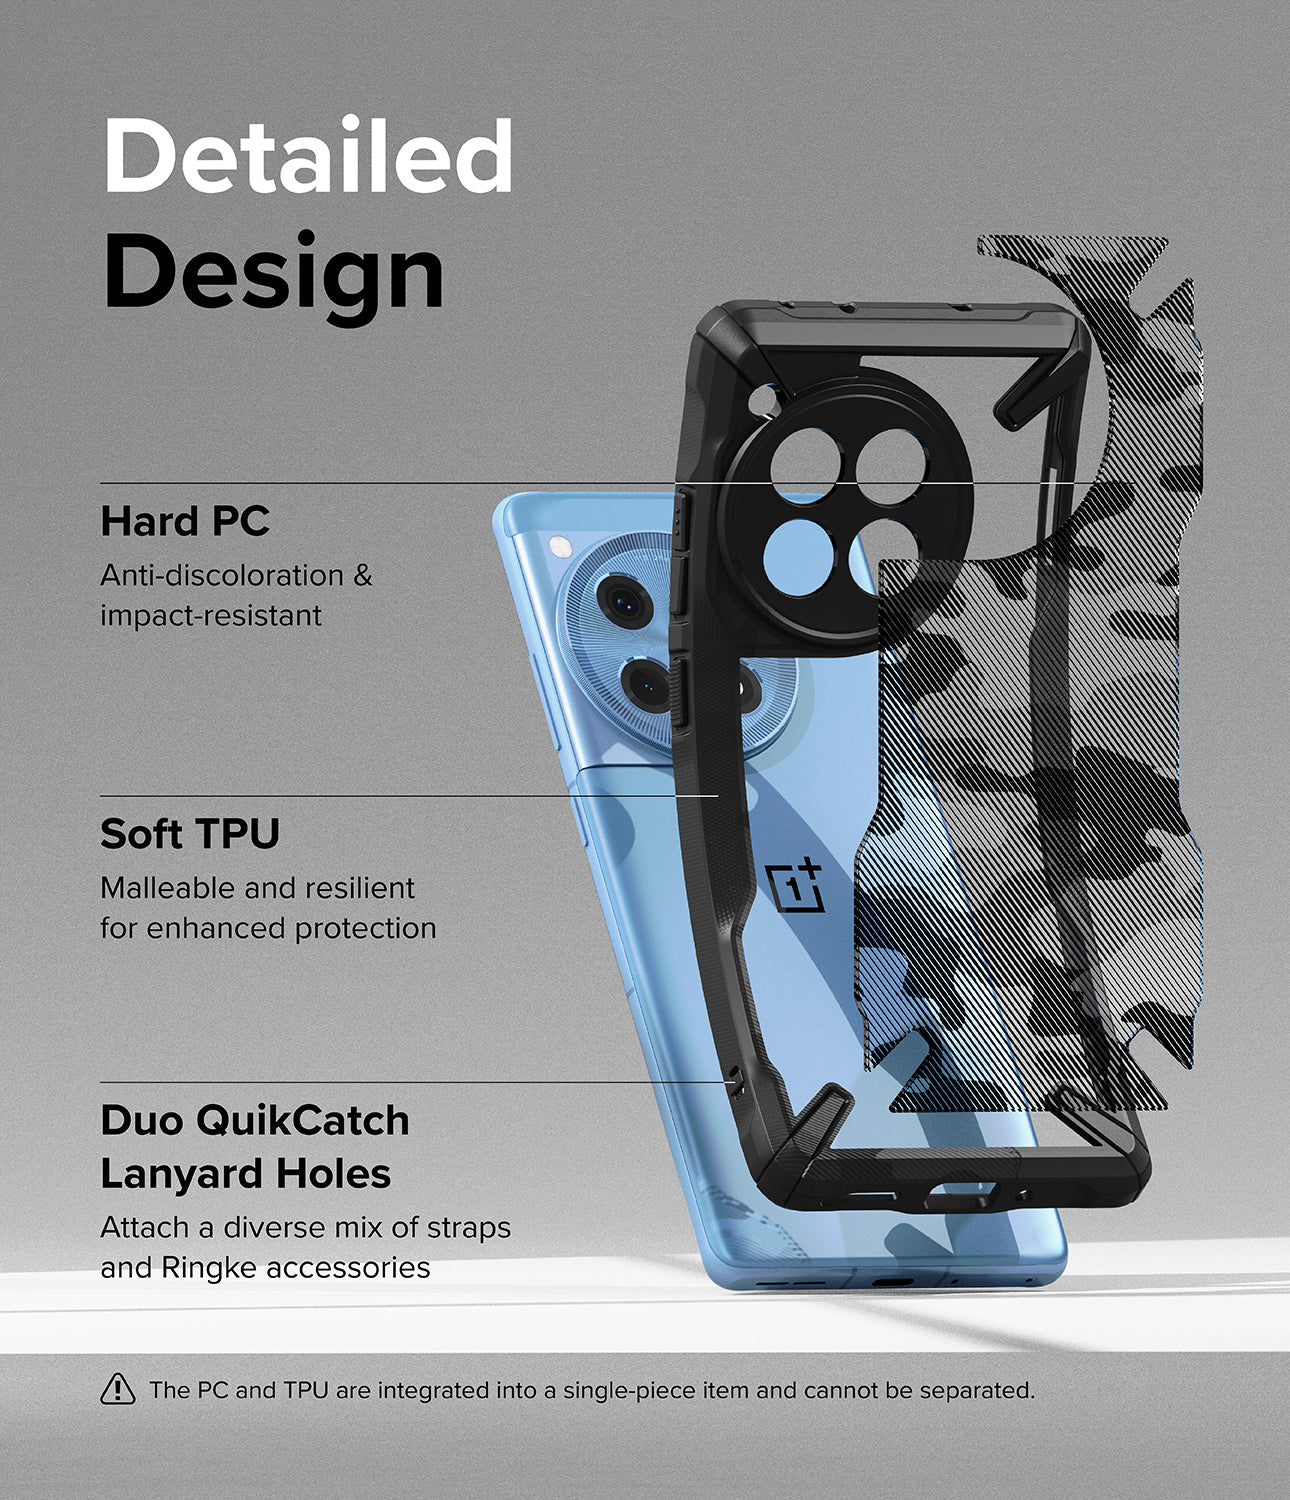 OnePlus 12R Case | Fusion-X Camo Black - Detailed Design. Anti-discoloration and impact-resistant with Hard PC. Malleable and resilient for enhanced protection with Soft TPU. Duo QuikCatch Lanyard Holes to attach a diverse mix of straps and Ringke accessories. 